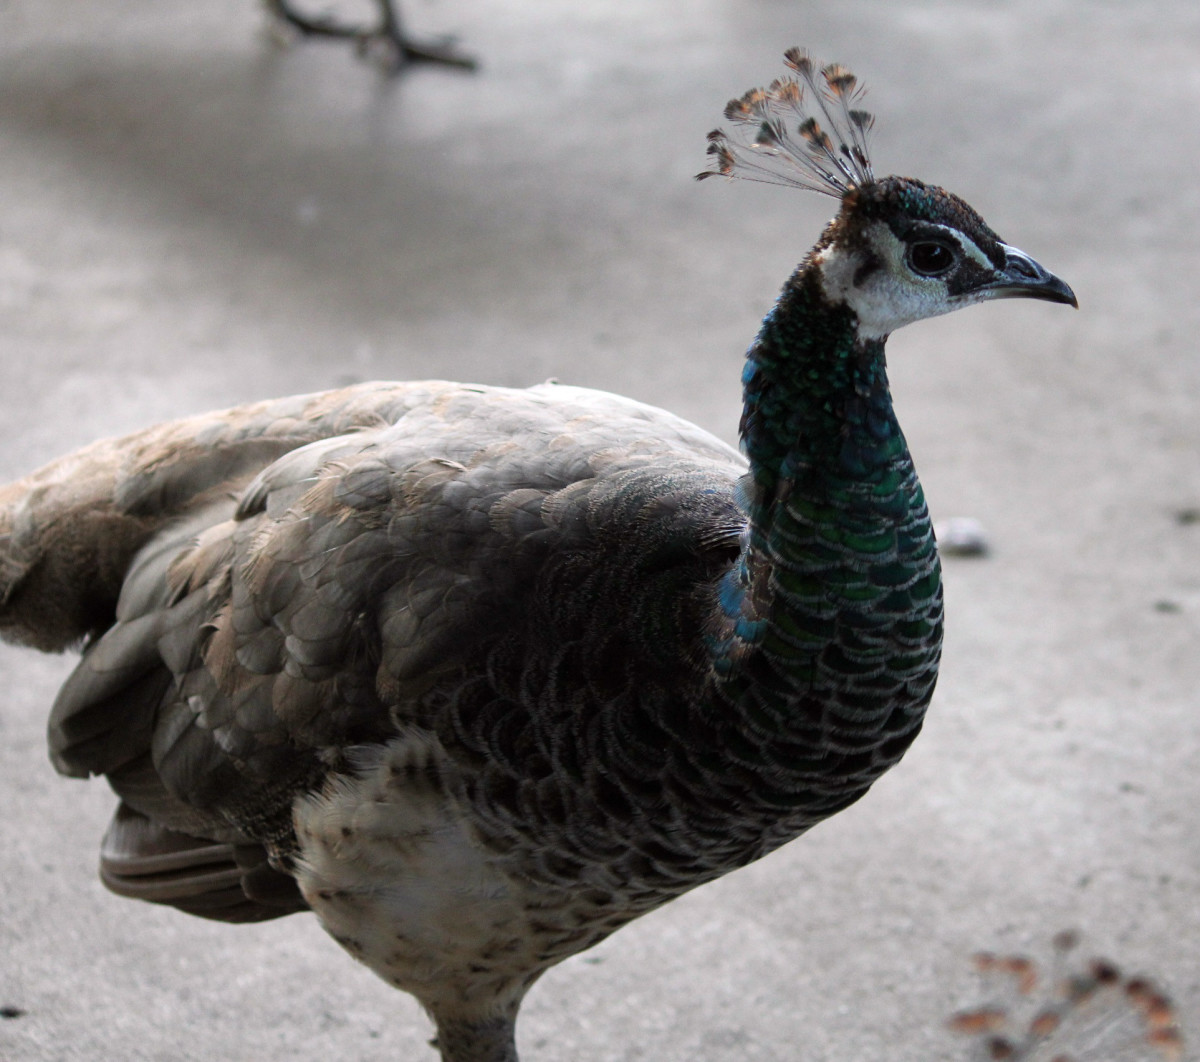 A peahen (she didn't get any fries from me either).